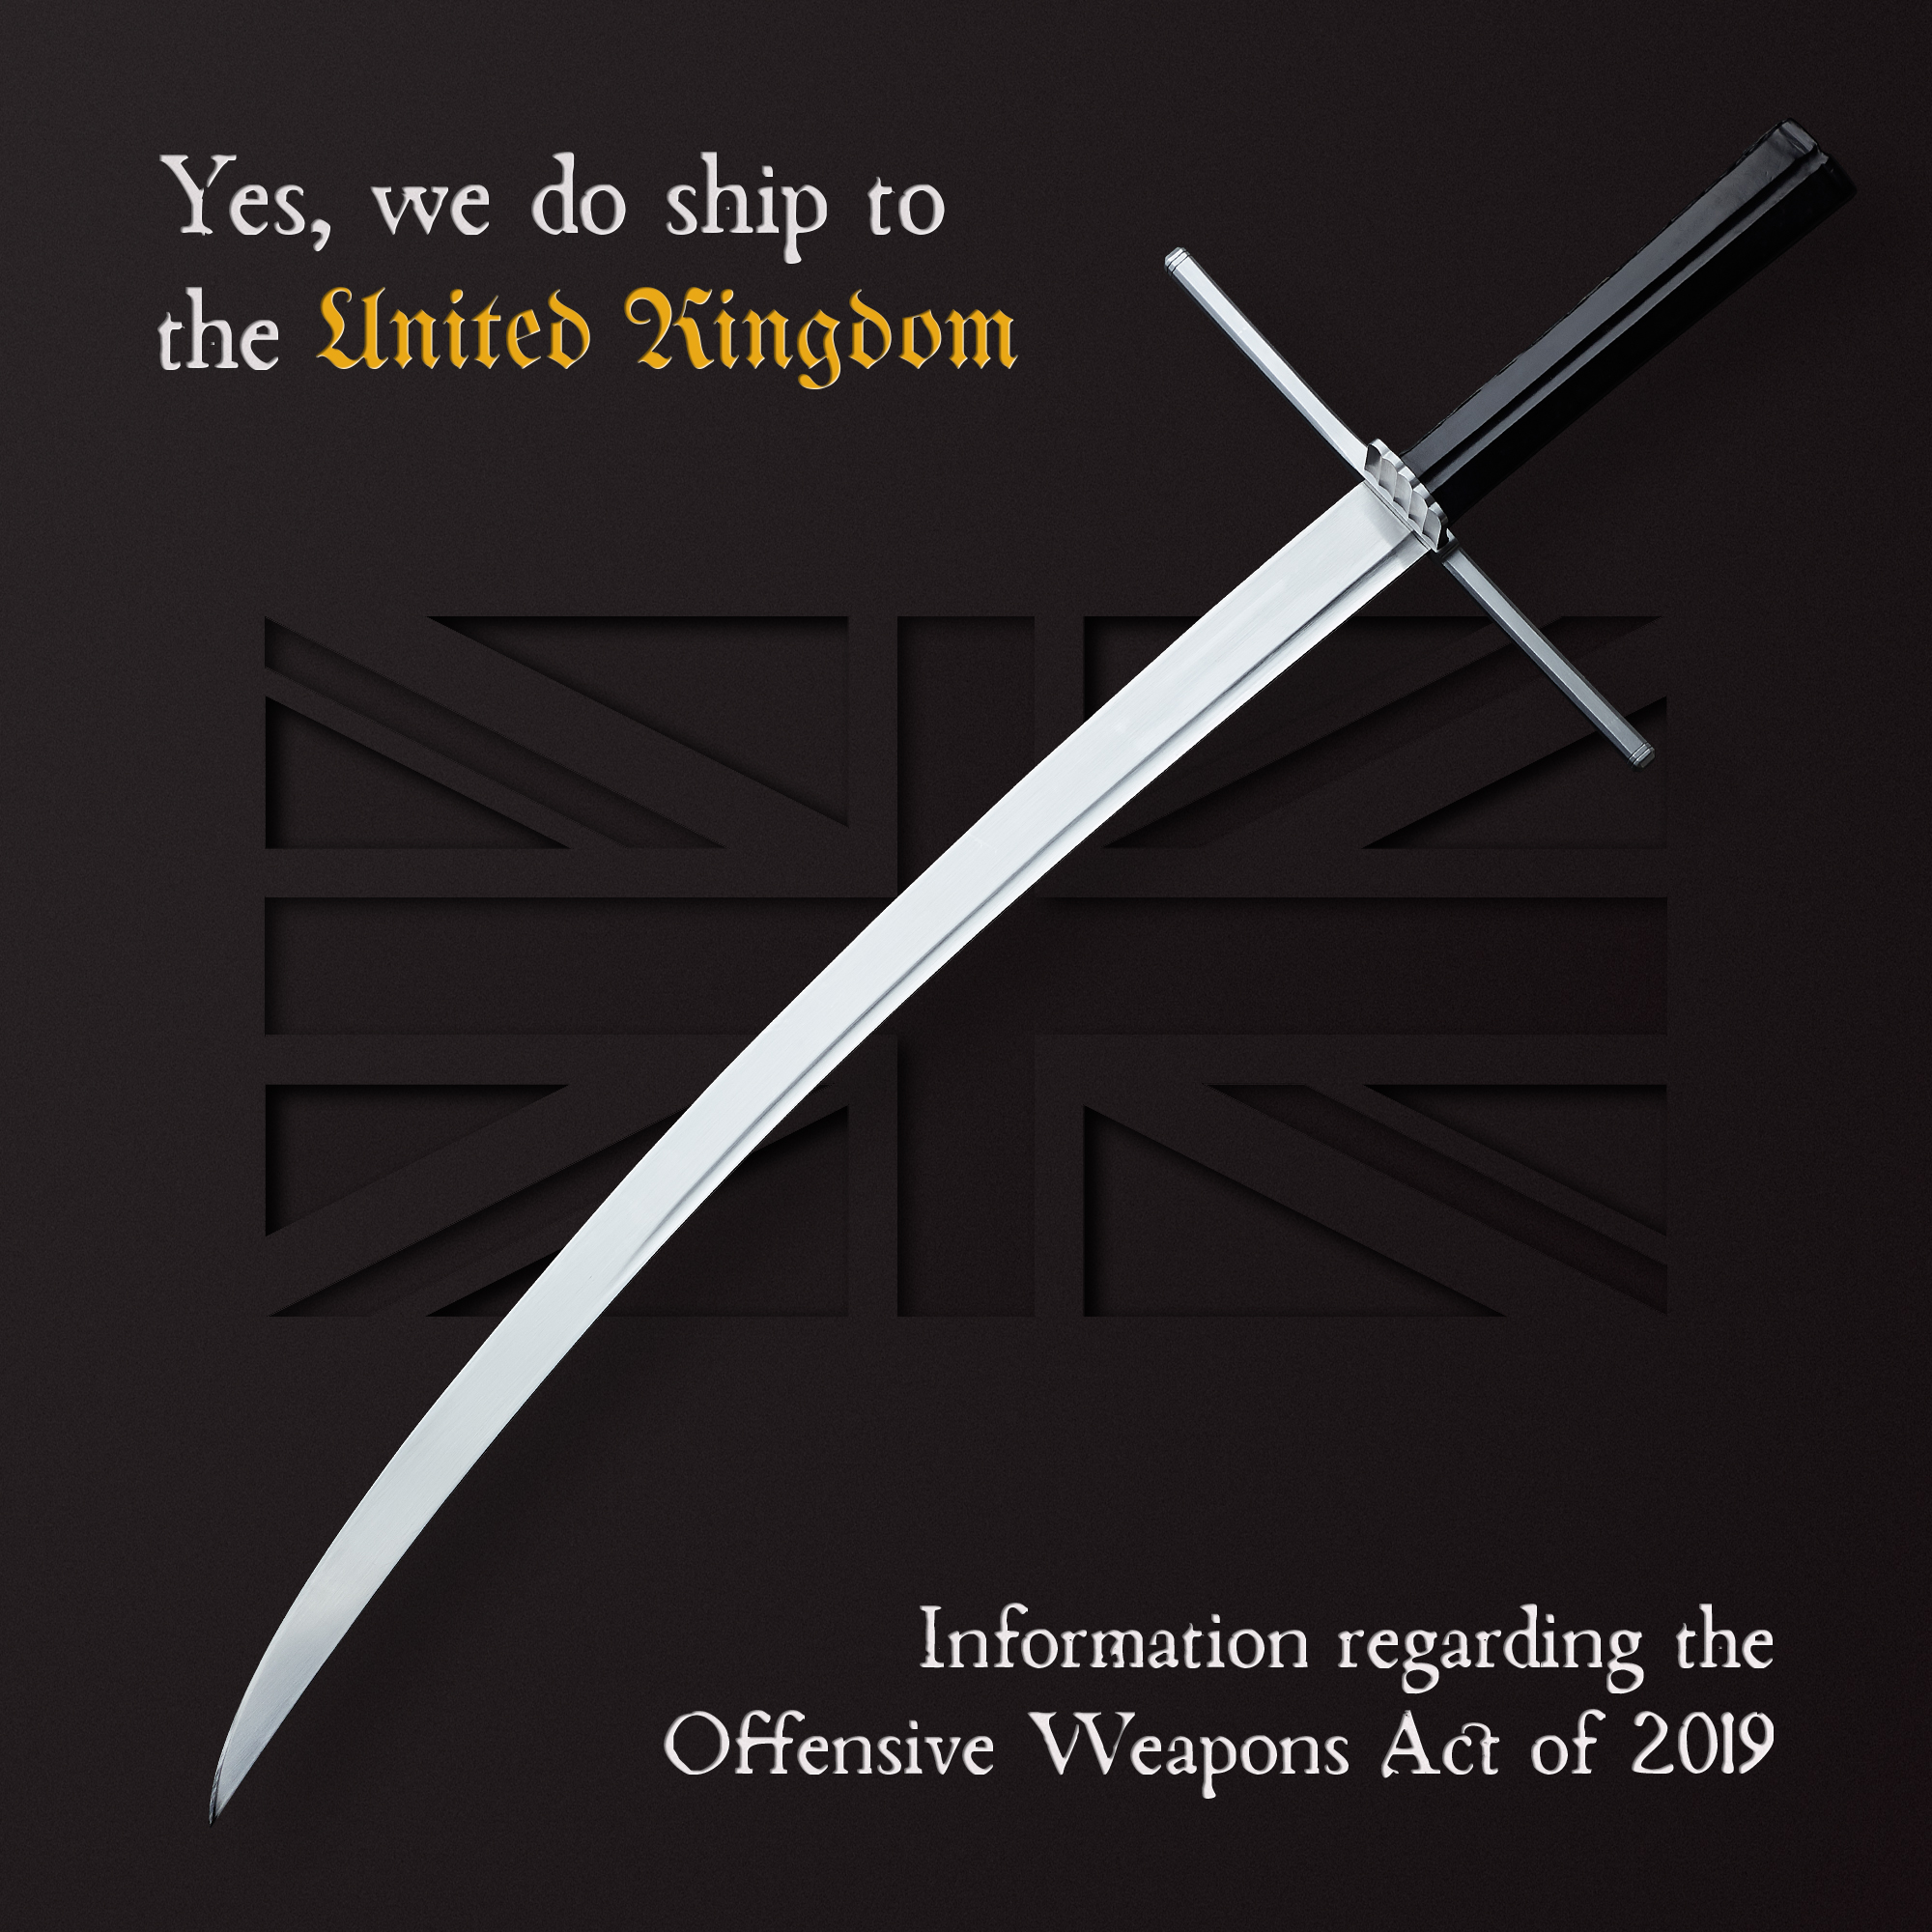 About the Offensive Weapons Act of the UK